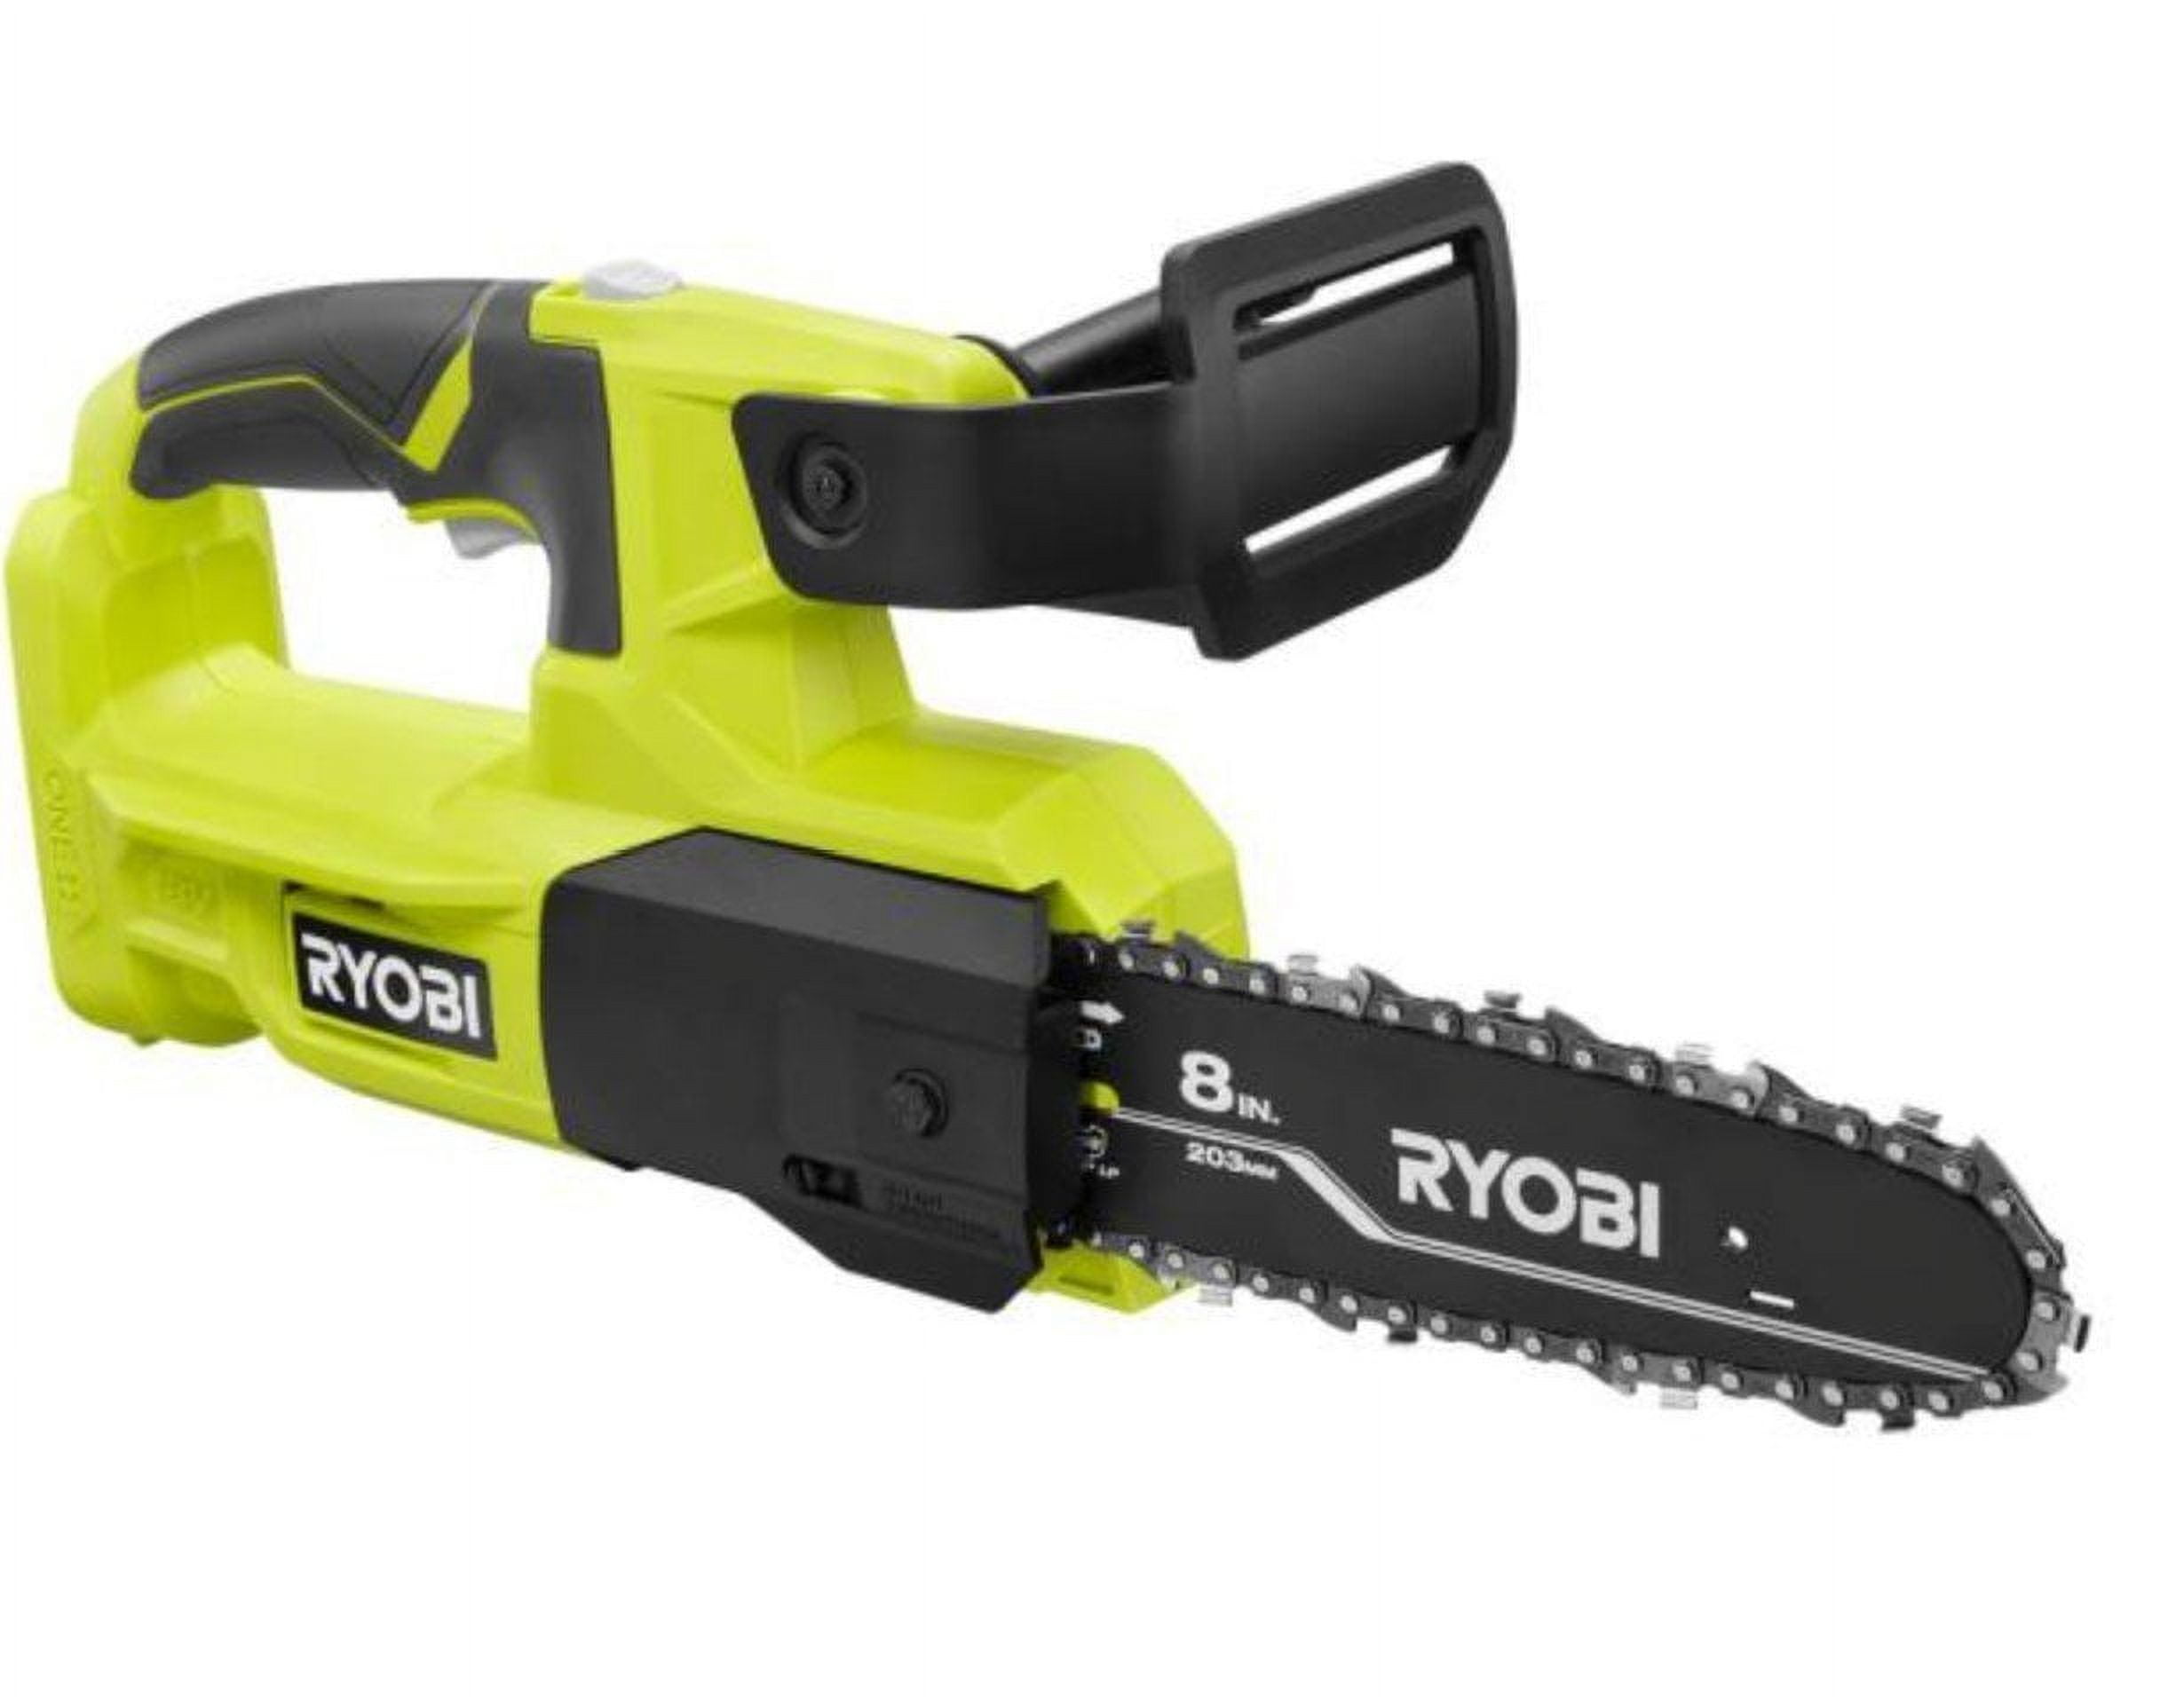 Ryobi One+ 8 in. 18-Volt Lithium-Ion Battery Pruning Chainsaw (Tool-Only) 